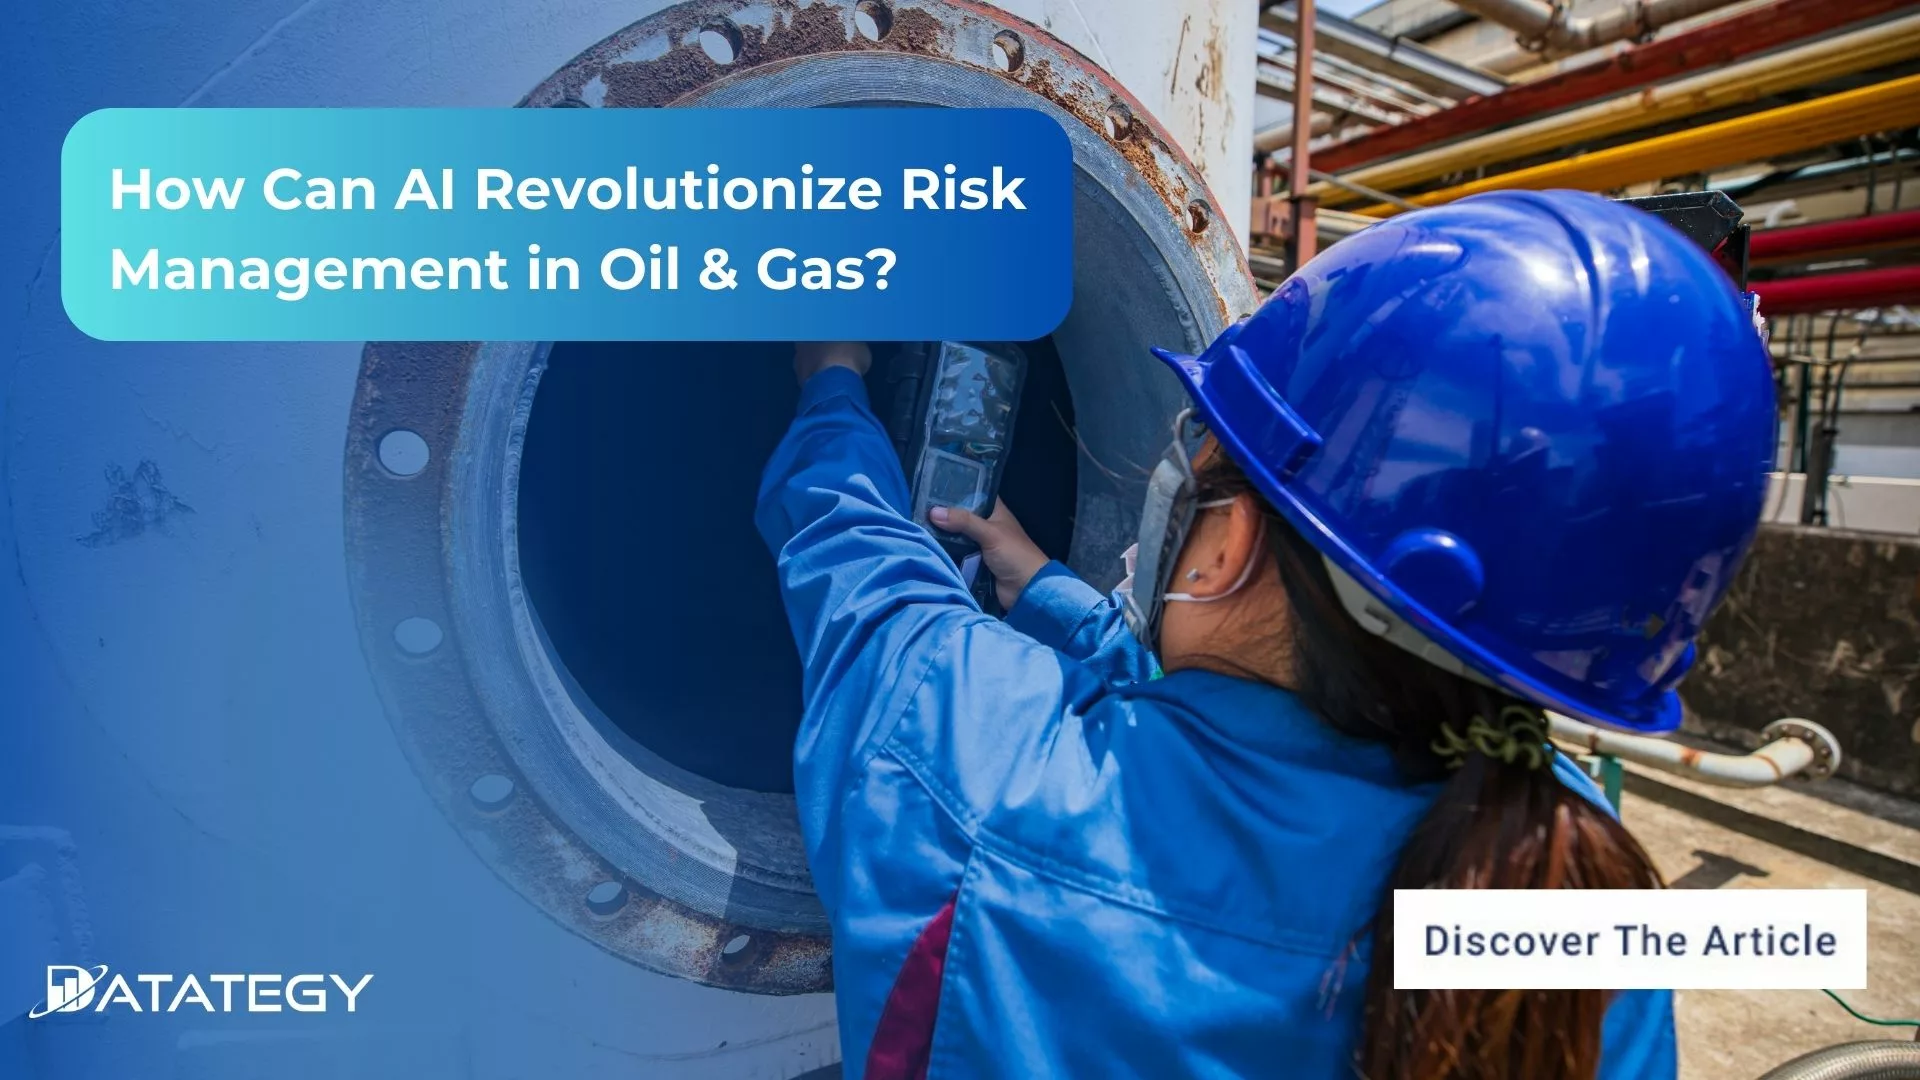 How Can AI Revolutionize Risk Management in Oil & Gas?